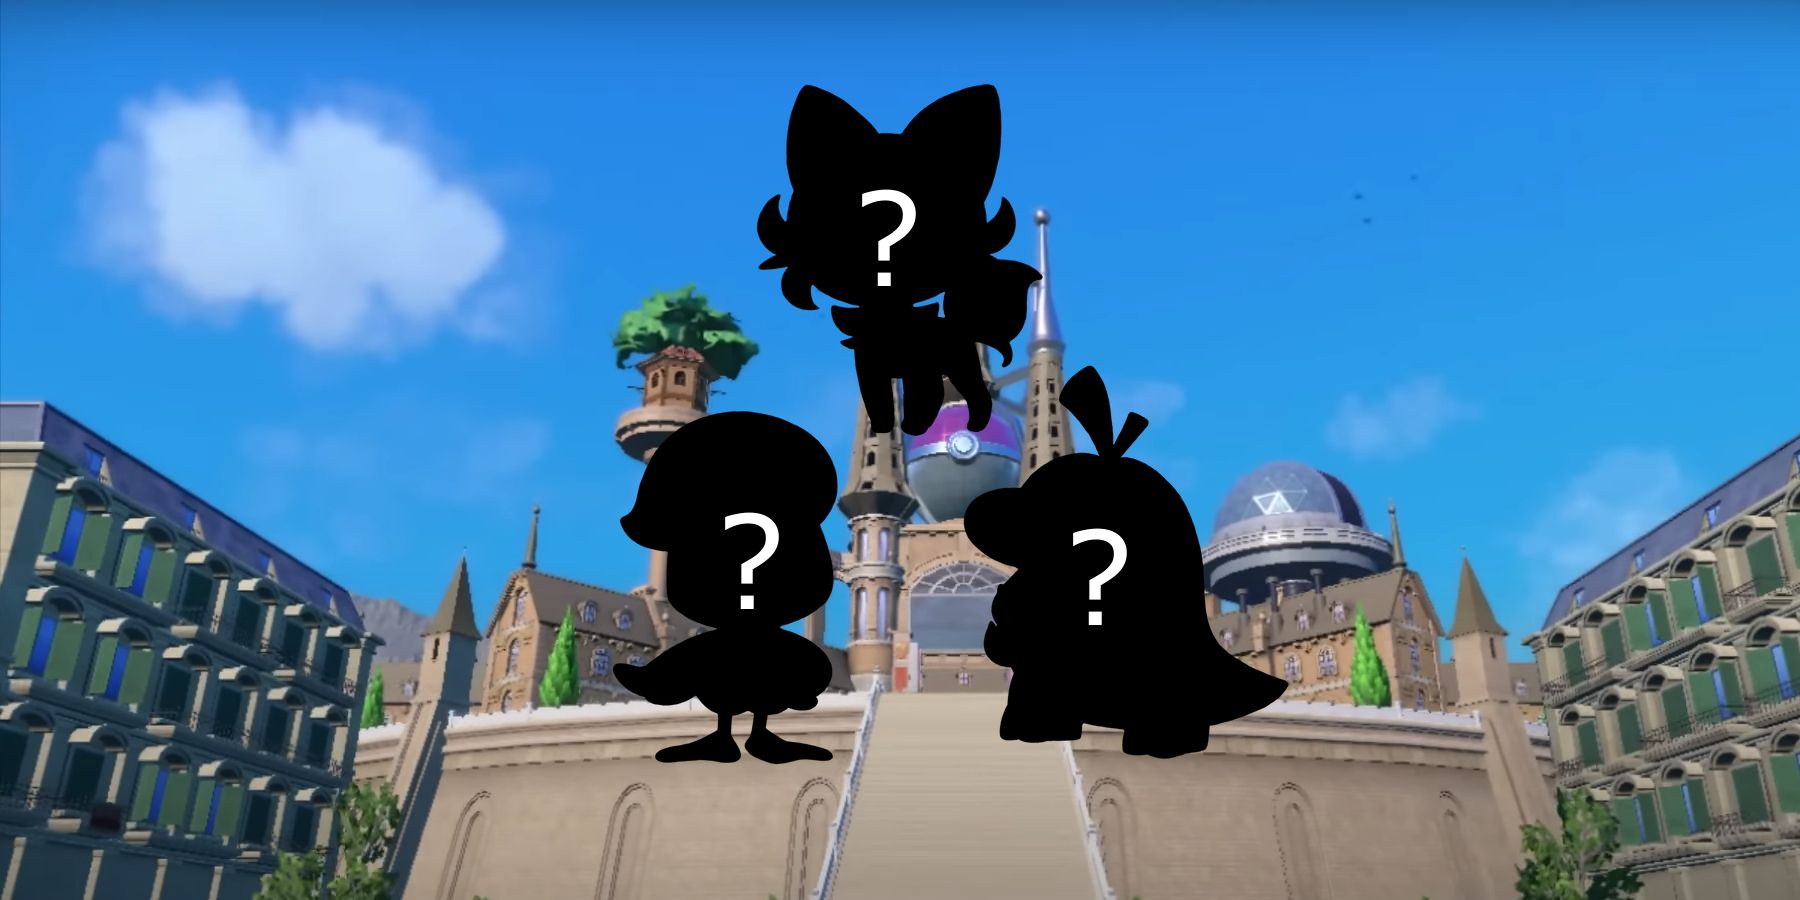 All-New-Pokemon-Rumored-For-Scarlet-and-Violet-Sprigatito-Fuecoco-Quaxly-Silhouettes-with-Question-Marks